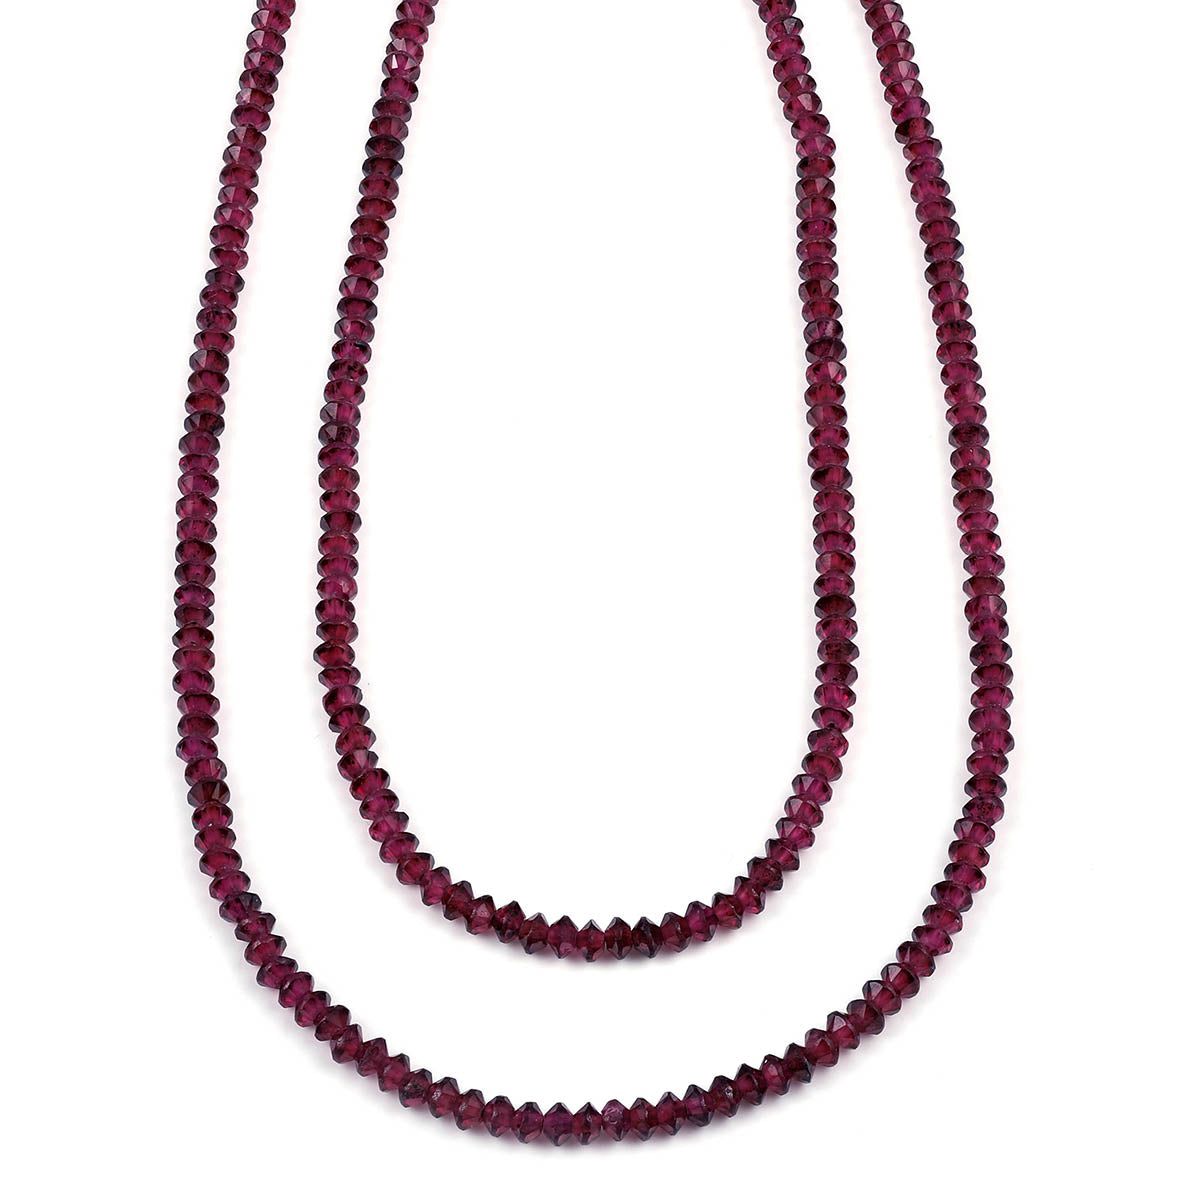 Garnet Beads Layered Silver Necklace